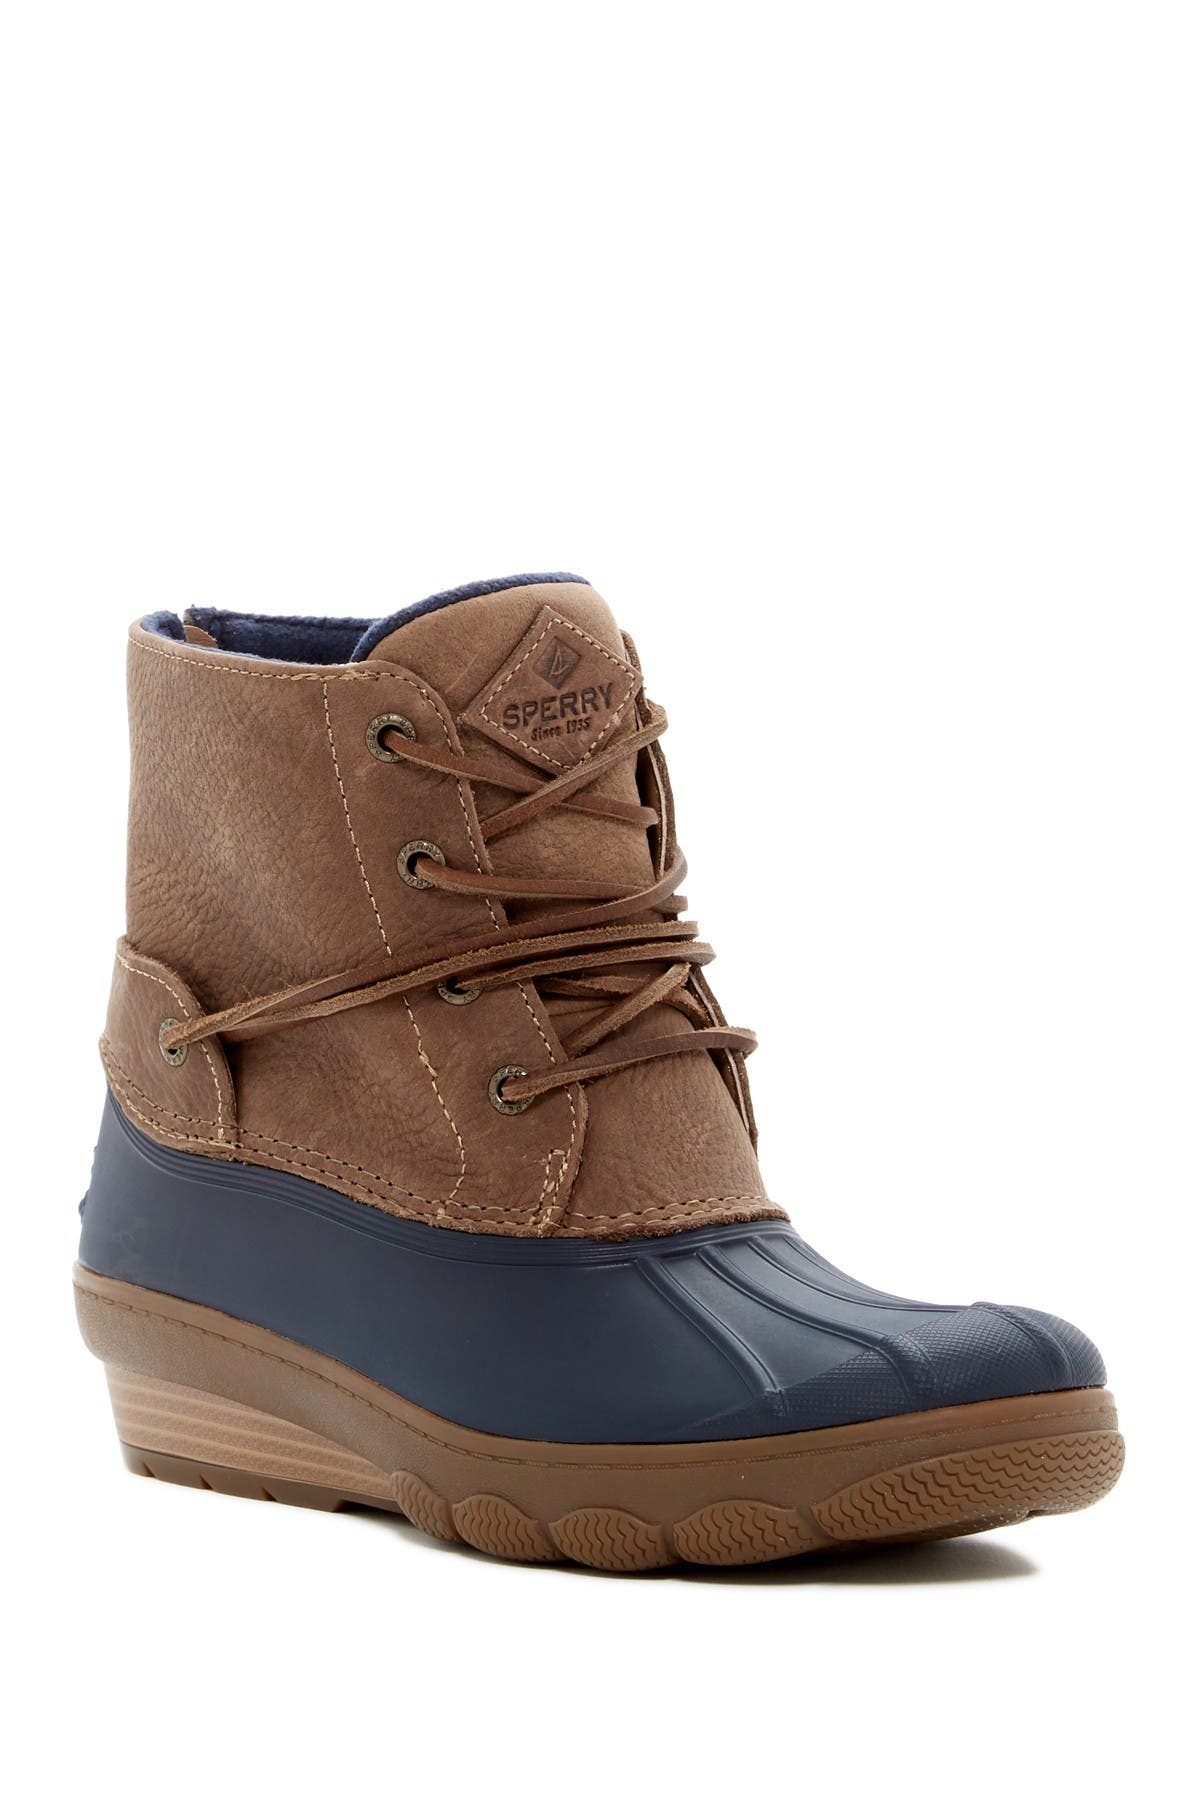 saltwater wedge tide leather boot